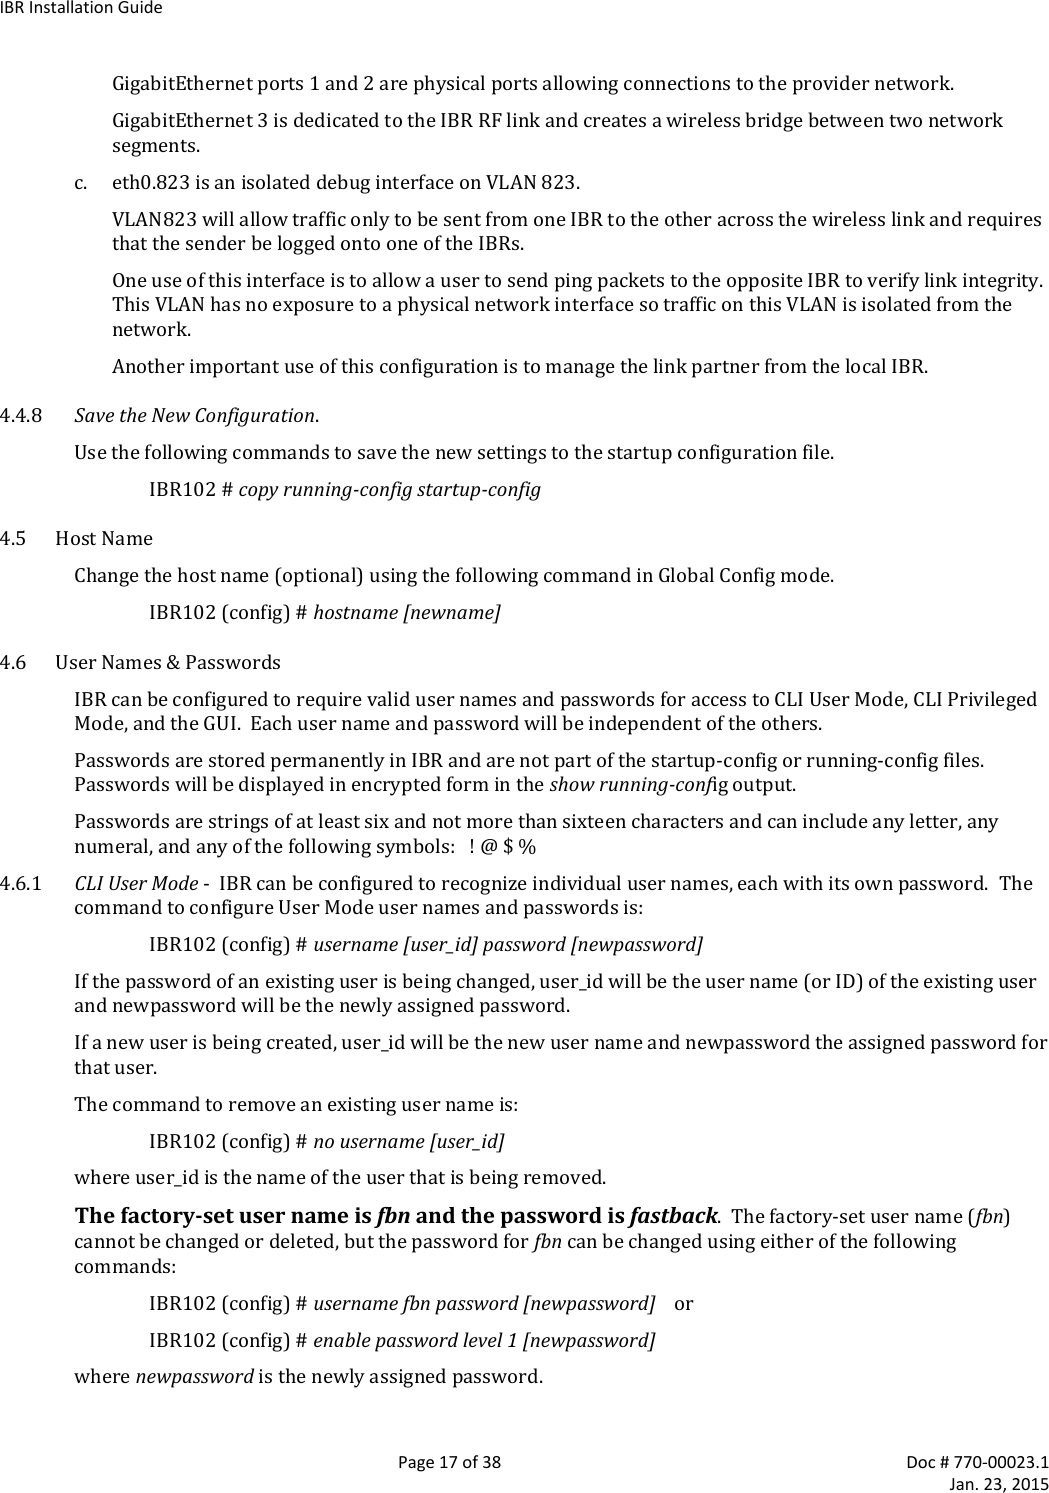 IBR Installation Guide   Page 17 of 38  Doc # 770-00023.1     Jan. 23, 2015 GigabitEthernet ports 1 and 2 are physical ports allowing connections to the provider network. GigabitEthernet 3 is dedicated to the IBR RF link and creates a wireless bridge between two network segments. c. eth0.823 is an isolated debug interface on VLAN 823. VLAN823 will allow traffic only to be sent from one IBR to the other across the wireless link and requires that the sender be logged onto one of the IBRs. One use of this interface is to allow a user to send ping packets to the opposite IBR to verify link integrity.  This VLAN has no exposure to a physical network interface so traffic on this VLAN is isolated from the network. Another important use of this configuration is to manage the link partner from the local IBR. 4.4.8 Save the New Configuration. Use the following commands to save the new settings to the startup configuration file. IBR102 # copy running-config startup-config 4.5 Host Name Change the host name (optional) using the following command in Global Config mode. IBR102 (config) # hostname [newname] 4.6 User Names &amp; Passwords IBR can be configured to require valid user names and passwords for access to CLI User Mode, CLI Privileged Mode, and the GUI.  Each user name and password will be independent of the others. Passwords are stored permanently in IBR and are not part of the startup-config or running-config files.  Passwords will be displayed in encrypted form in the show running-config output. Passwords are strings of at least six and not more than sixteen characters and can include any letter, any numeral, and any of the following symbols:   ! @ $ % 4.6.1 CLI User Mode -  IBR can be configured to recognize individual user names, each with its own password.  The command to configure User Mode user names and passwords is: IBR102 (config) # username [user_id] password [newpassword] If the password of an existing user is being changed, user_id will be the user name (or ID) of the existing user and newpassword will be the newly assigned password. If a new user is being created, user_id will be the new user name and newpassword the assigned password for that user. The command to remove an existing user name is:   IBR102 (config) # no username [user_id] where user_id is the name of the user that is being removed.  The factory-set user name is fbn and the password is fastback.  The factory-set user name (fbn) cannot be changed or deleted, but the password for fbn can be changed using either of the following commands:   IBR102 (config) # username fbn password [newpassword]    or   IBR102 (config) # enable password level 1 [newpassword] where newpassword is the newly assigned password. 